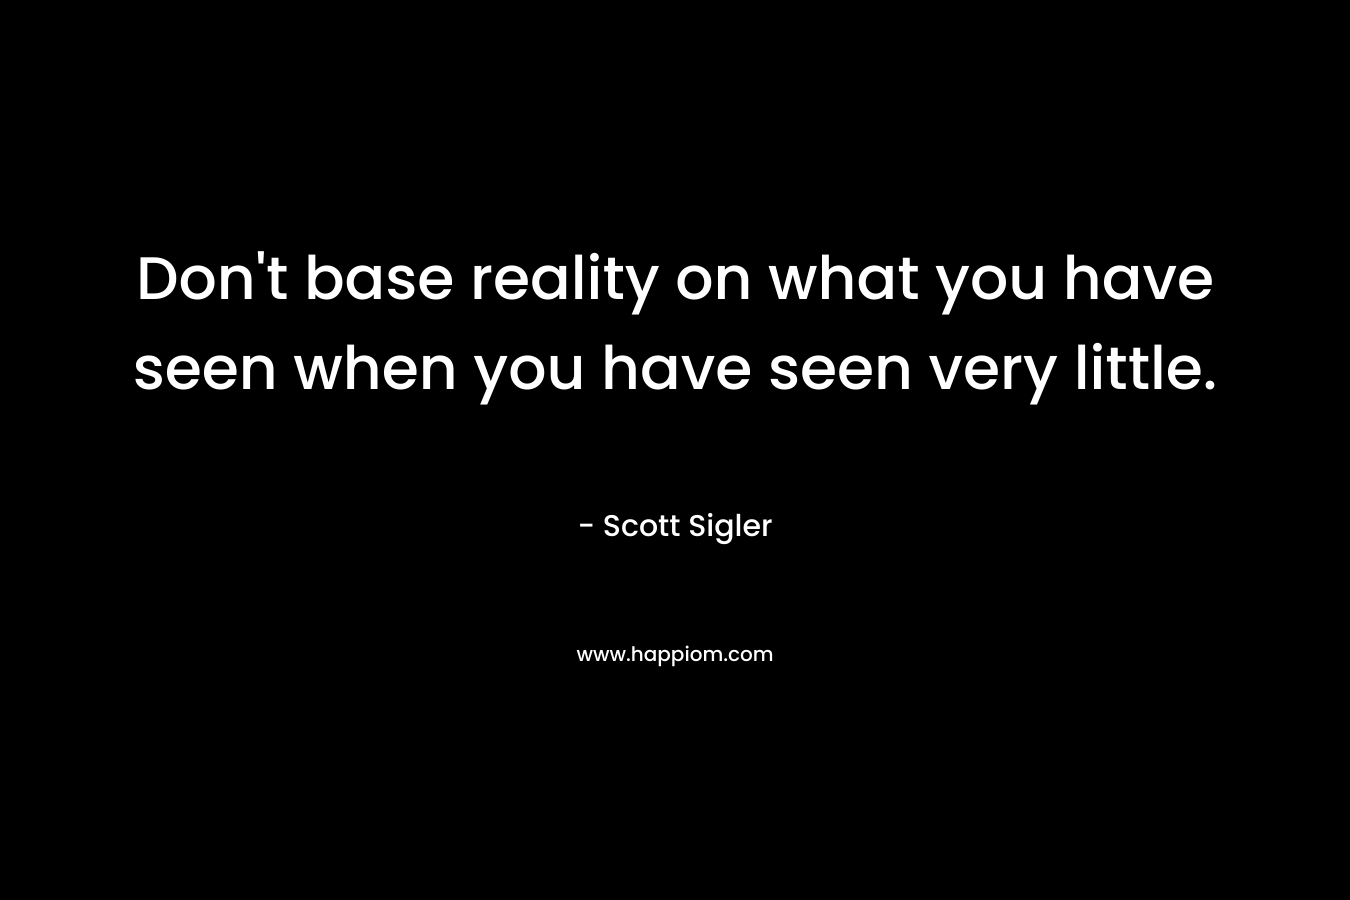 Don't base reality on what you have seen when you have seen very little.